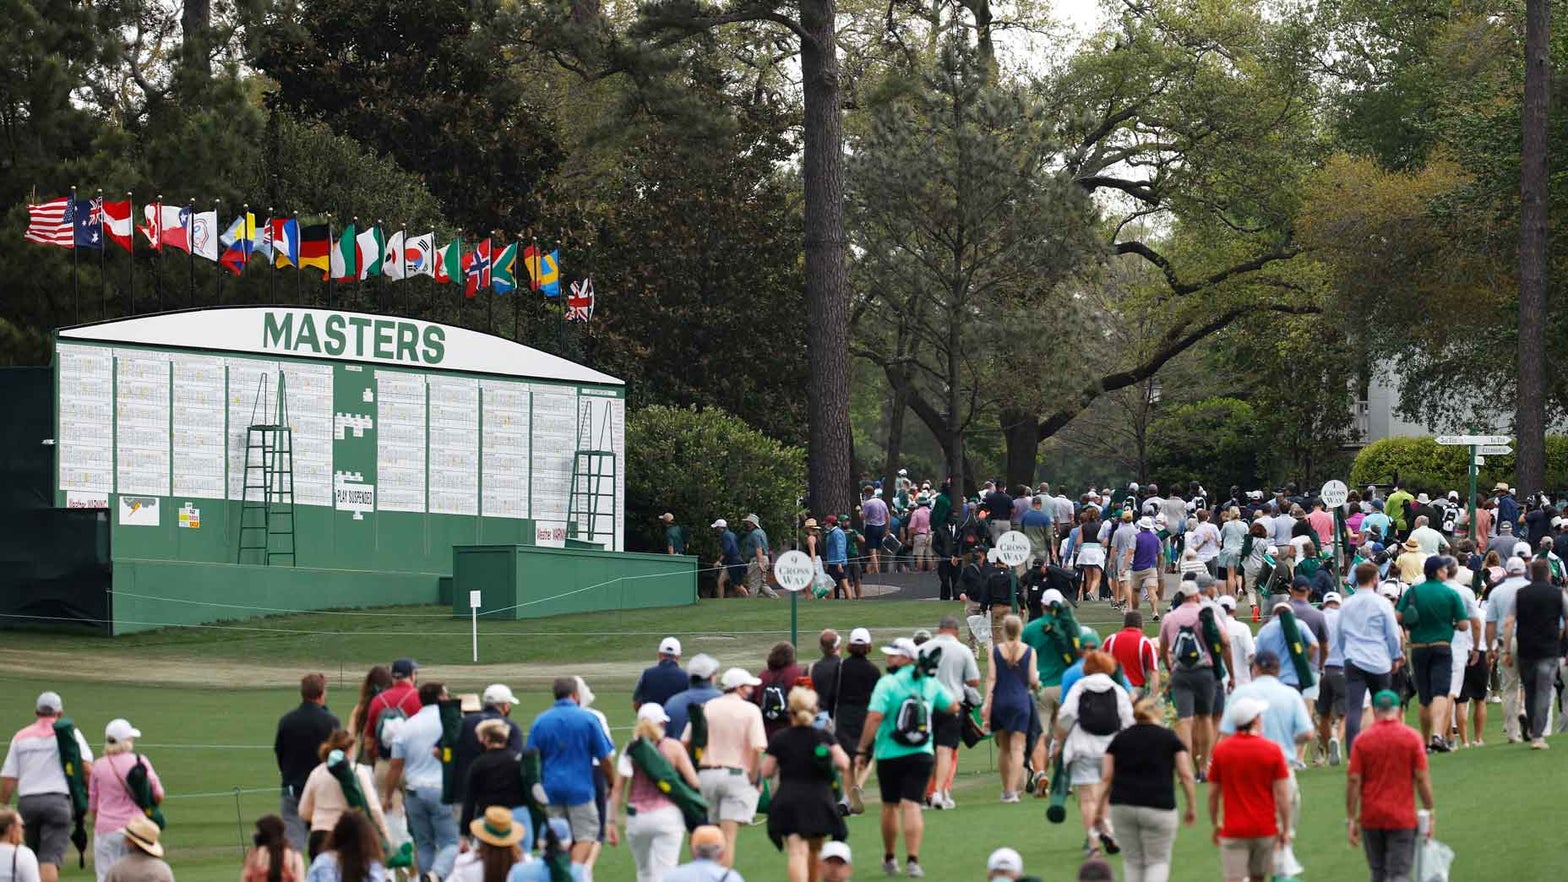 2022 Masters tickets The lottery is open! Here's how to apply